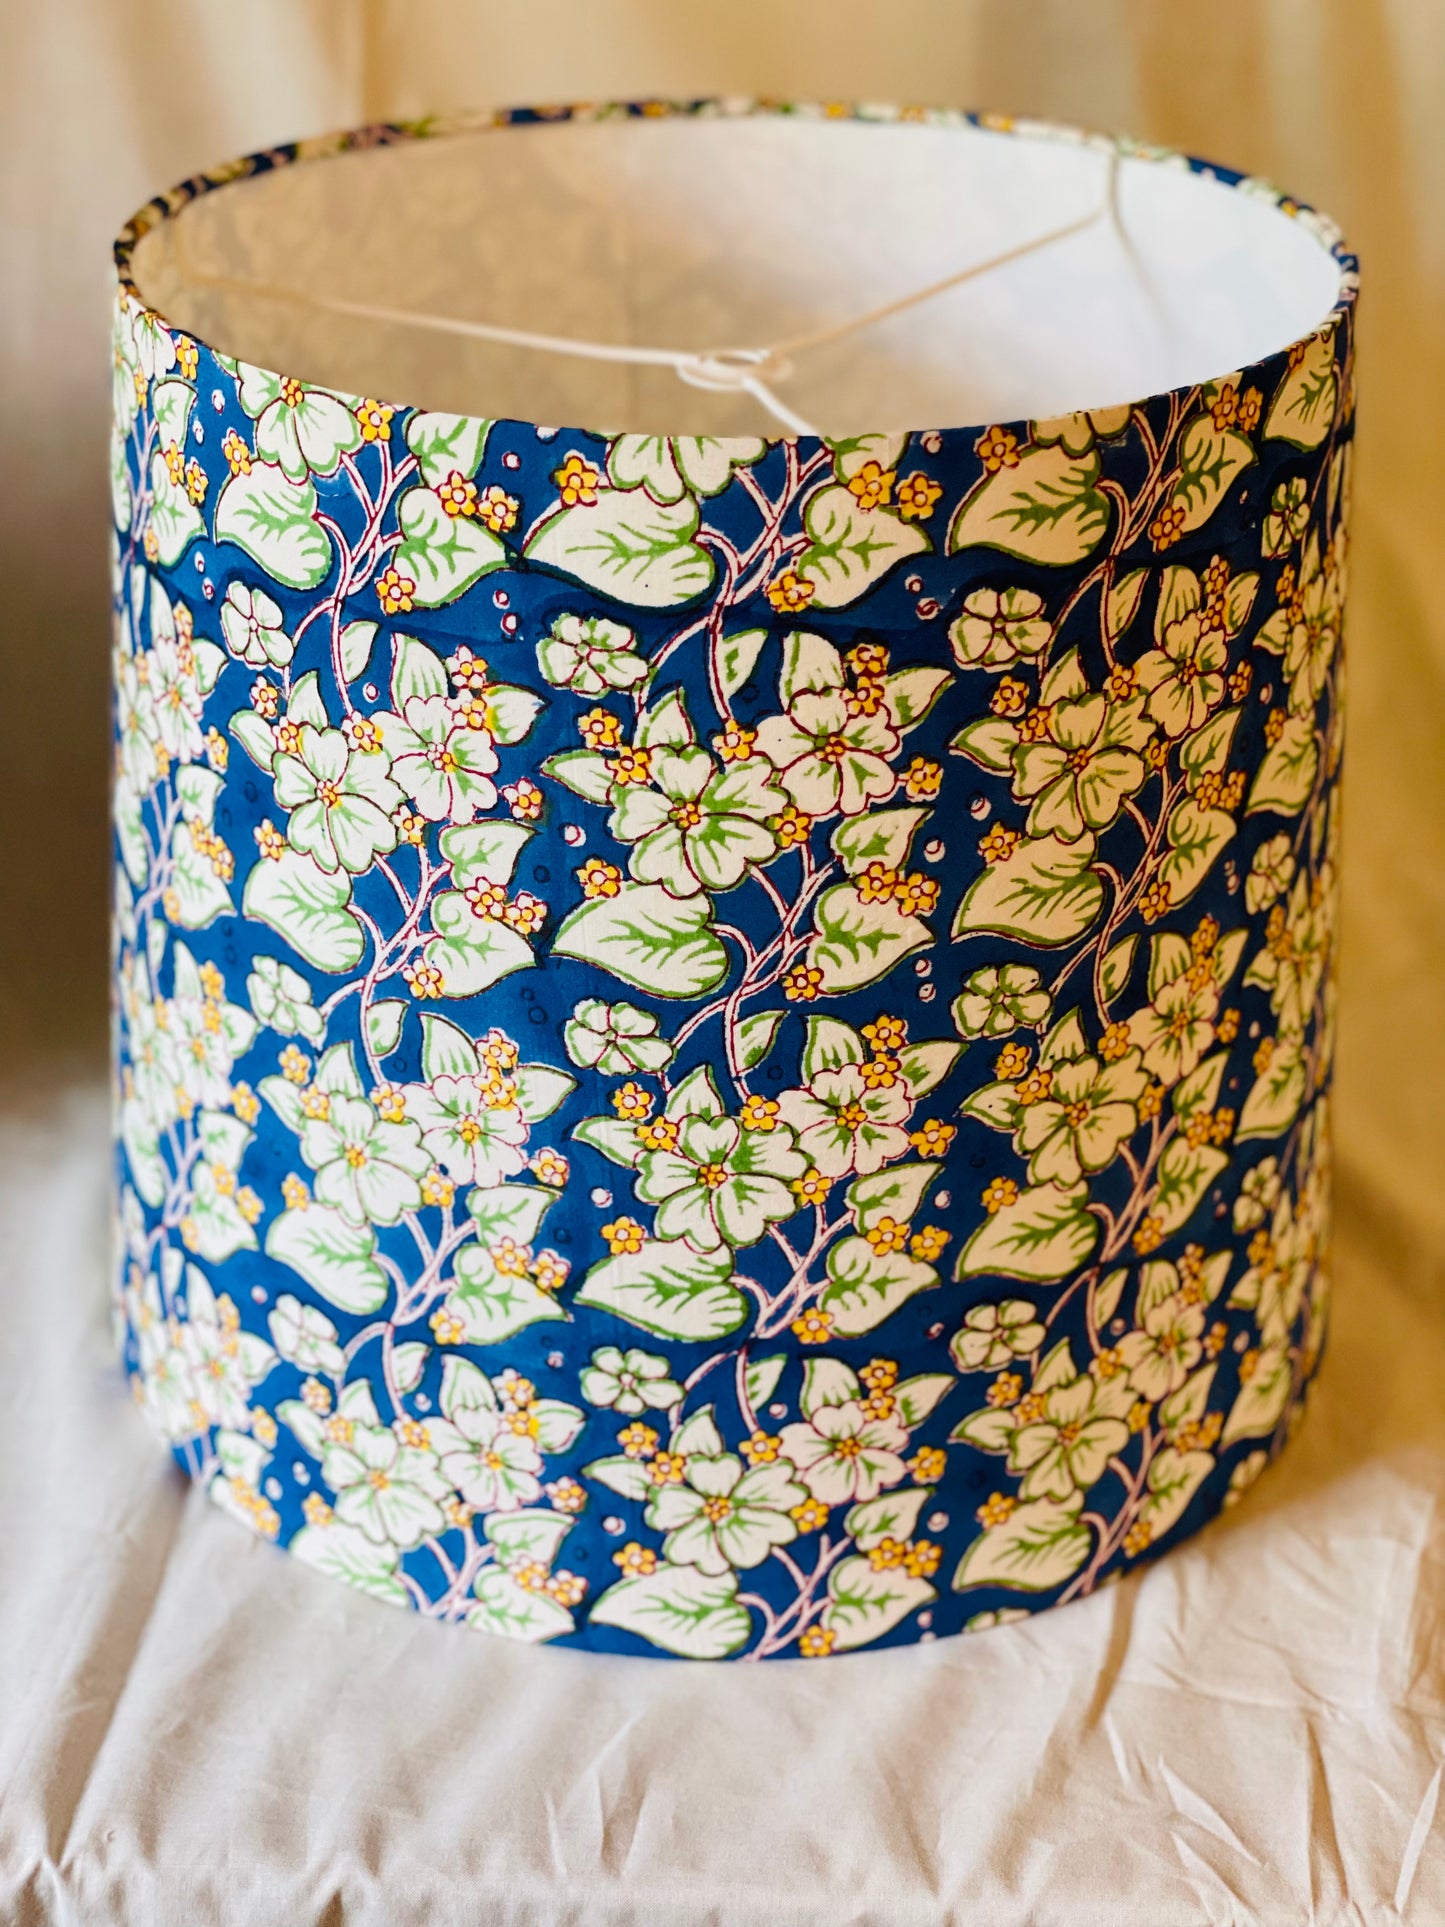 Large Empire Shade. 11.75 x 13.75 x 11.75. Indian Hand Block Print. Cobalt, Banana Yellow, and Ivory Floral.